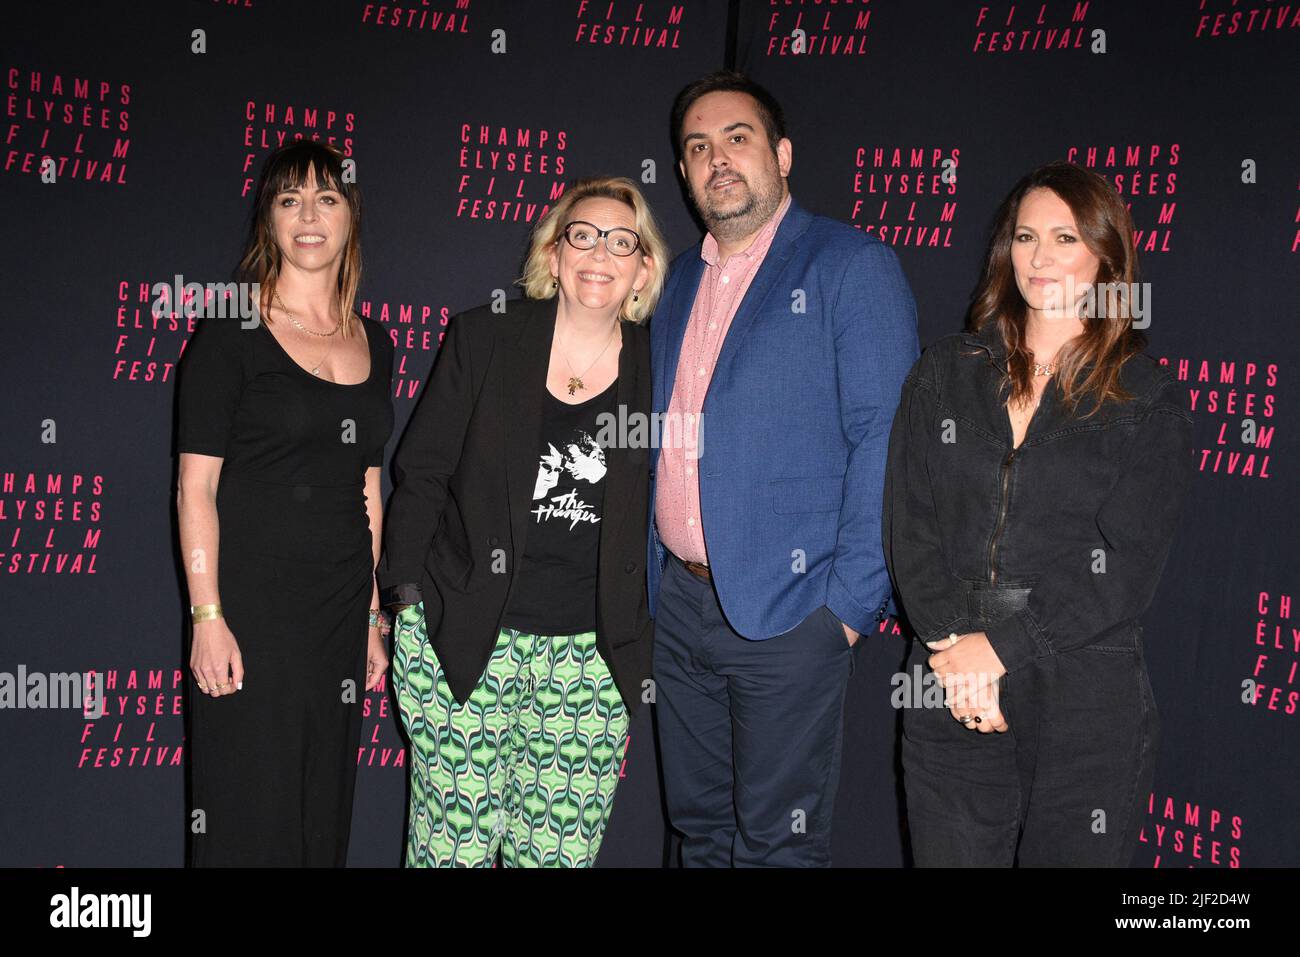 Paris, France, on June 28, 2022. Pascaline Potdevin, Marie Sauvion, Renan Croos and Juliette Reitzer (members of the Press jury) arriving to the Closing ceremony of the 11th edition of Champs Elysees Film Festival at Gaumont Champs Elysees cinema, in Paris, France, on June 28, 2022. Photo by Mireille Ampilhac/ABACAPRESS.COM Stock Photo